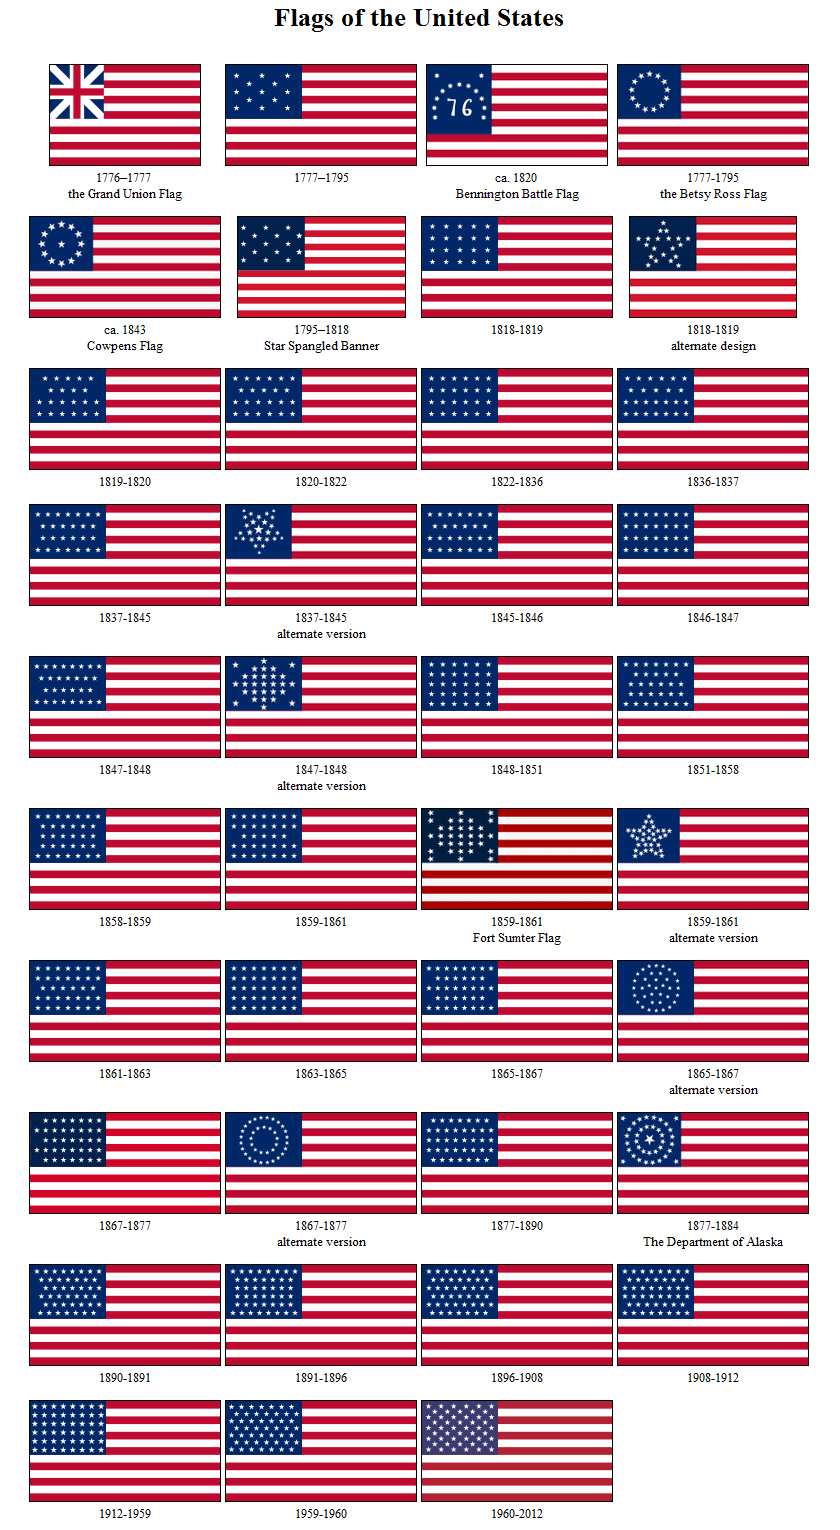 History Of The Us Flag Prop Agenda